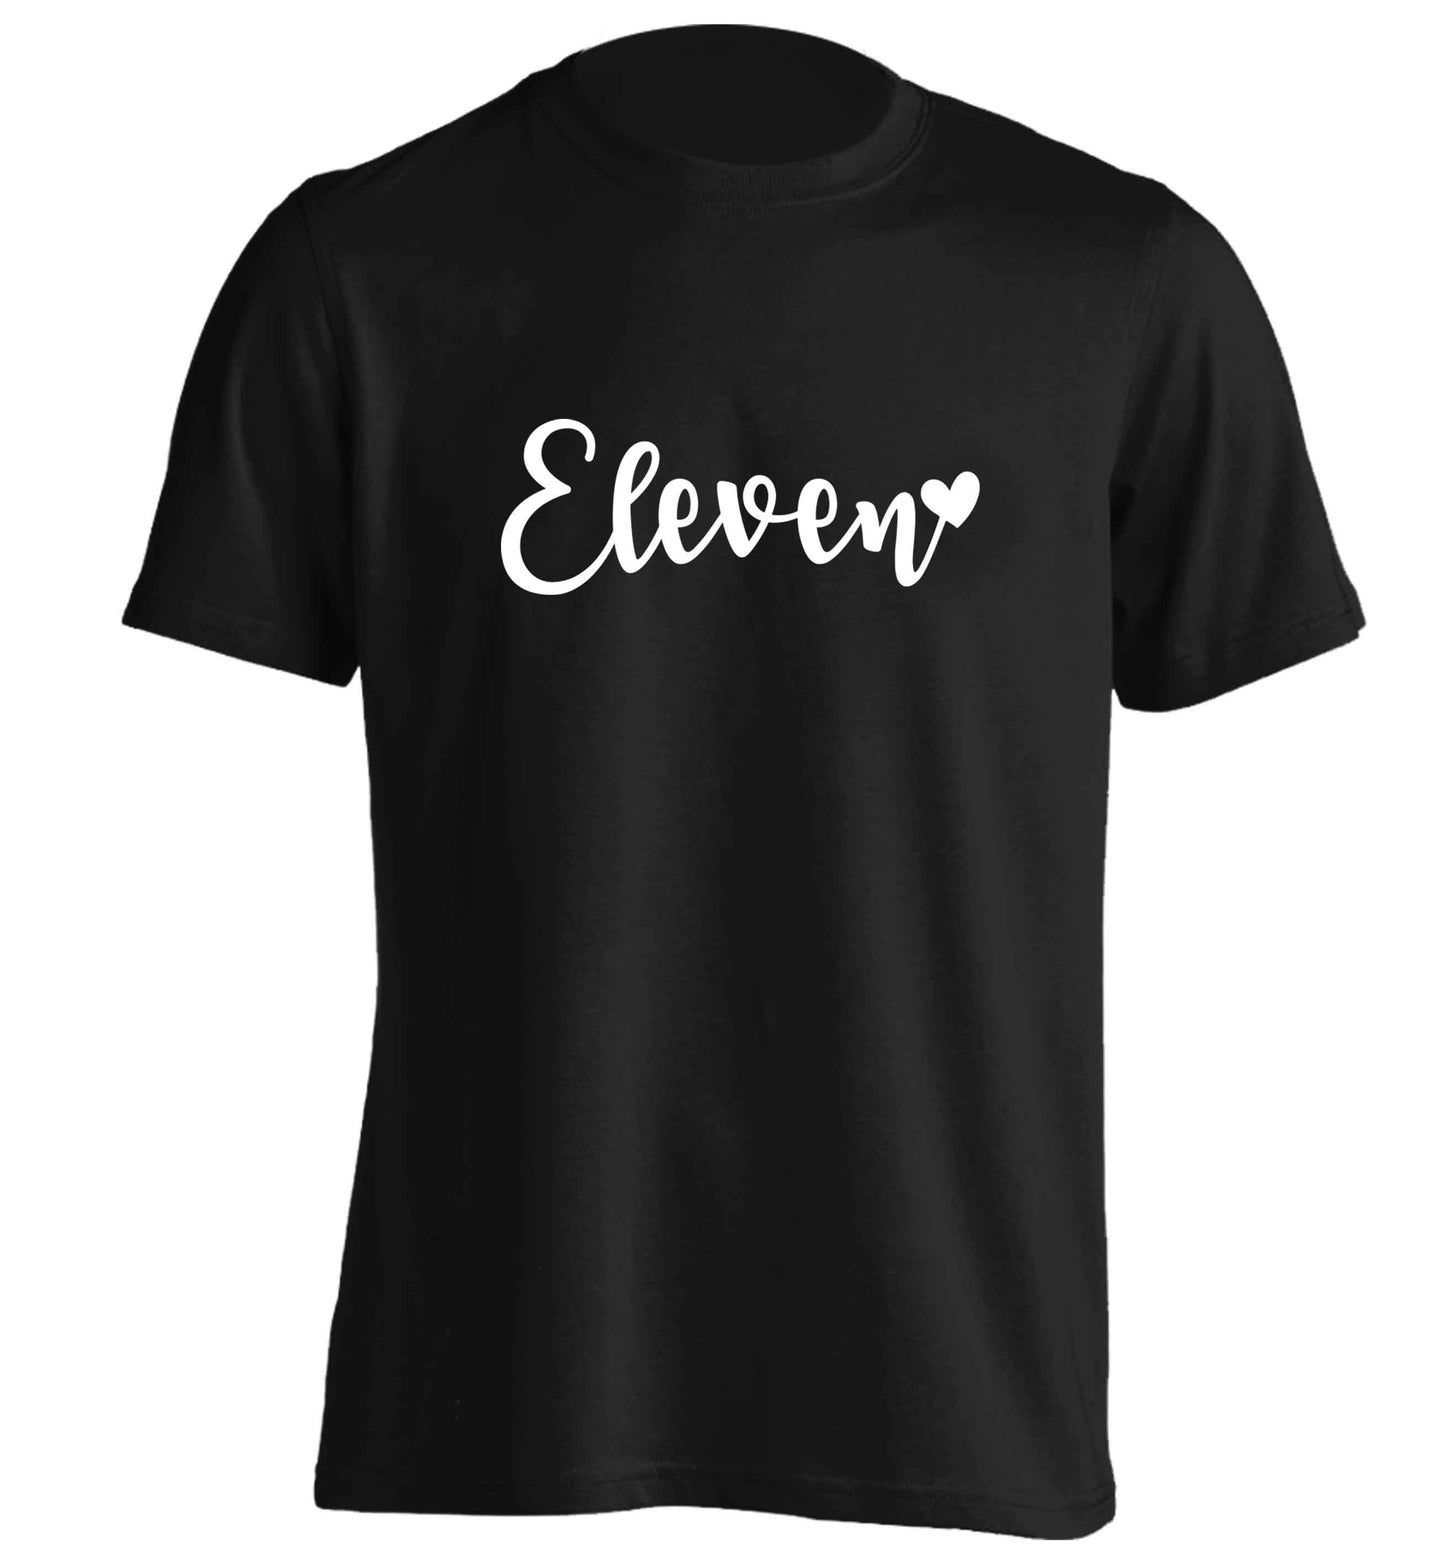 Eleven and heart! adults unisex black Tshirt 2XL